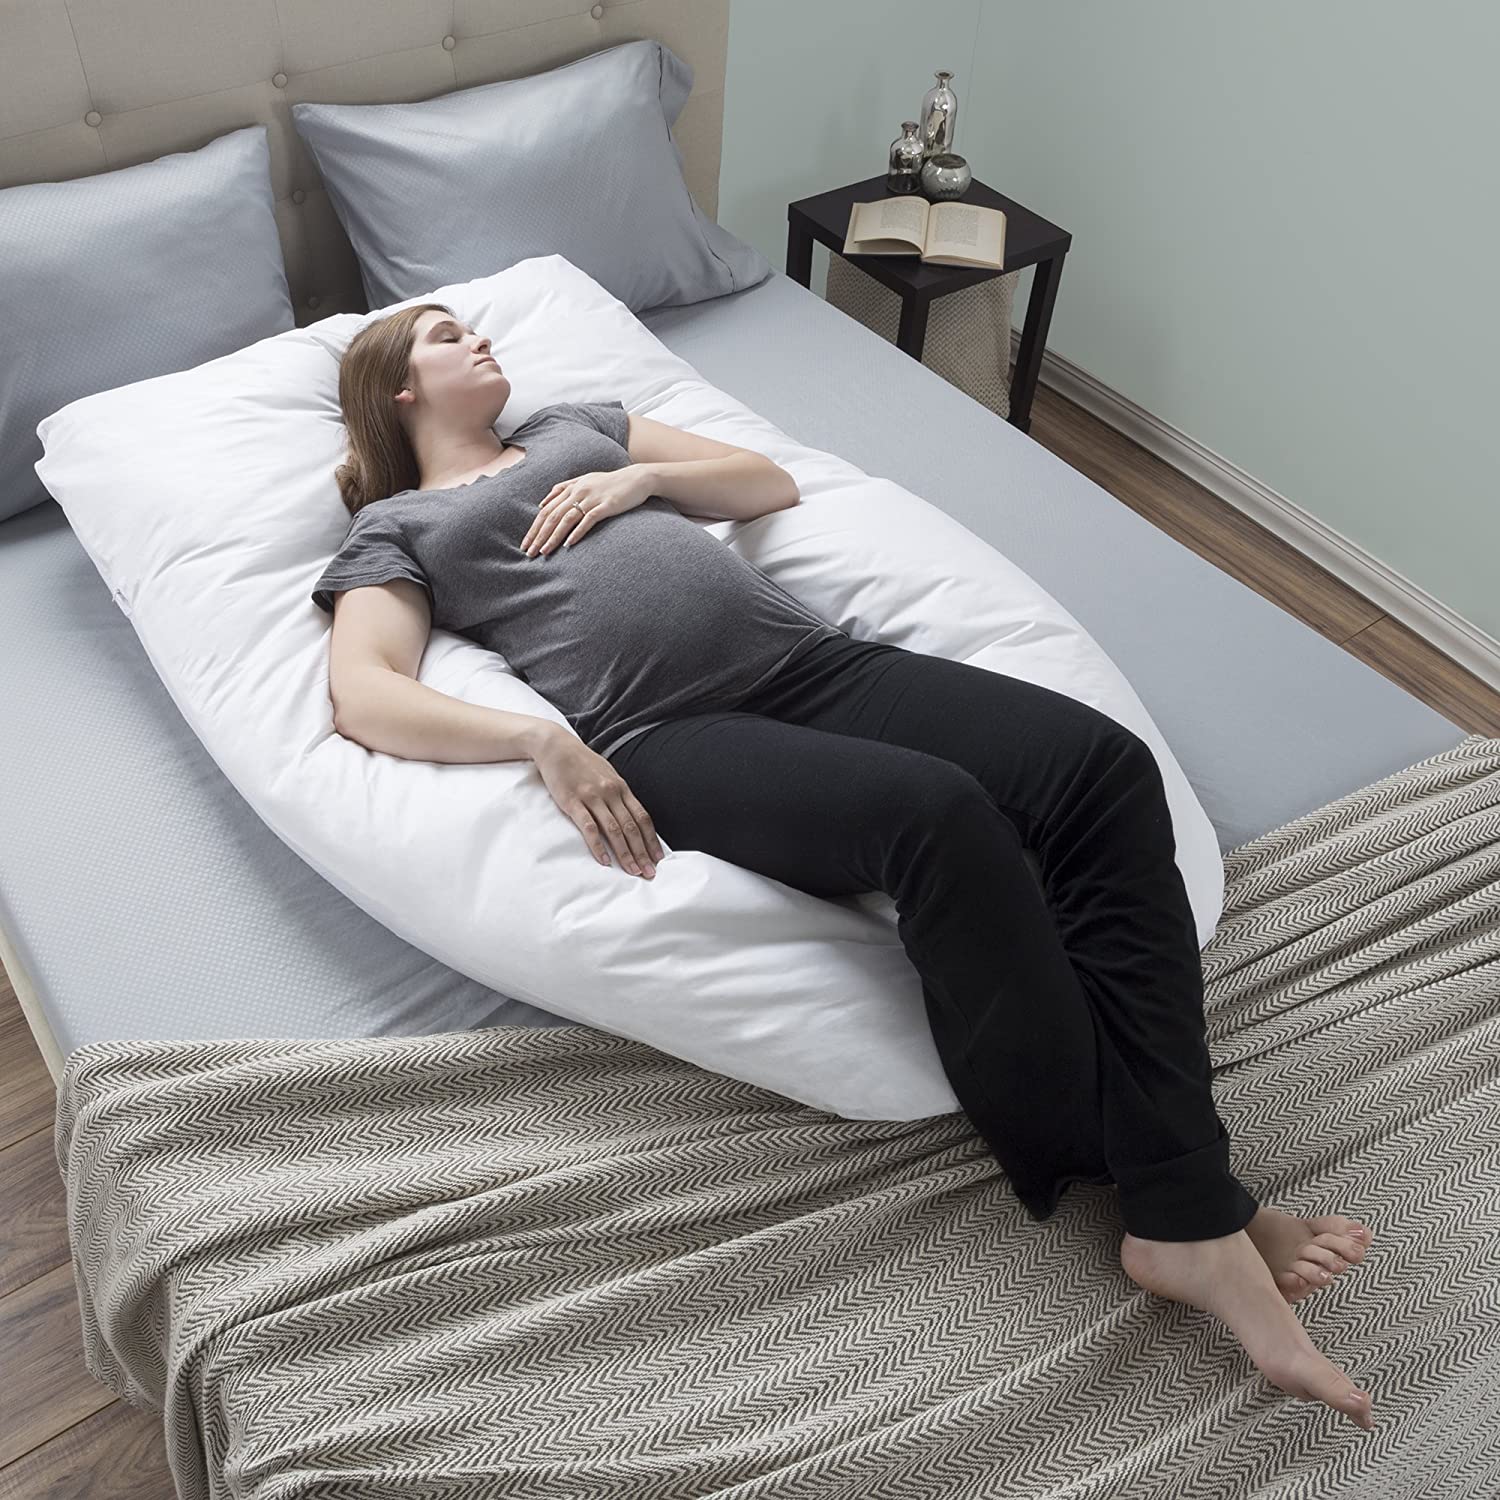 Top 11 Best Full Body Pregnancy Pillow Guide 2020 Which One To Buy?